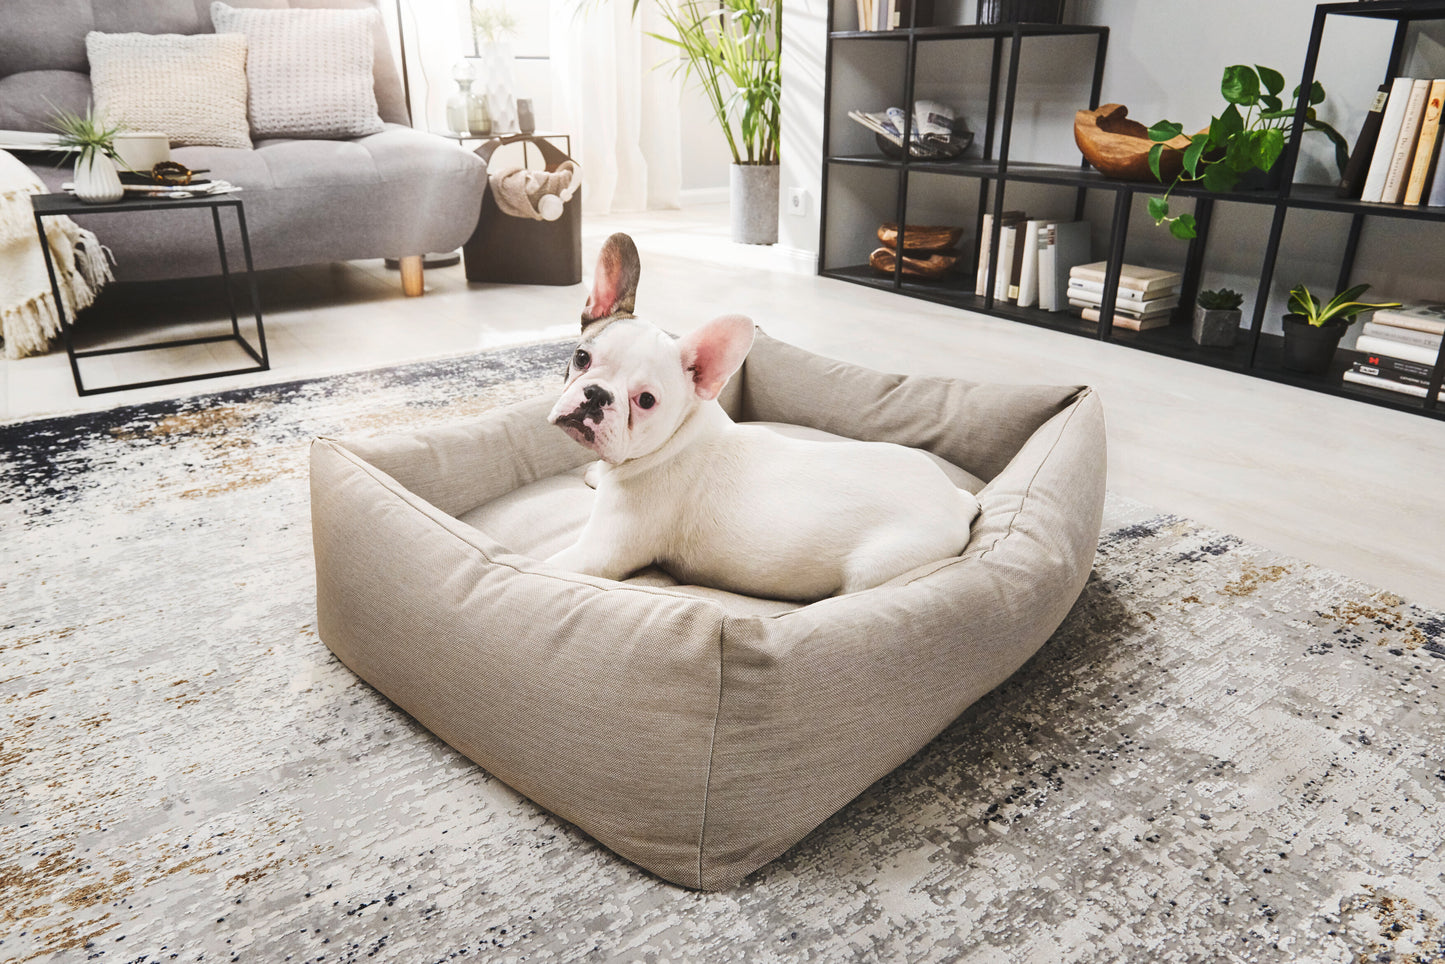 CLASSIC dog bed "SMOOTH"